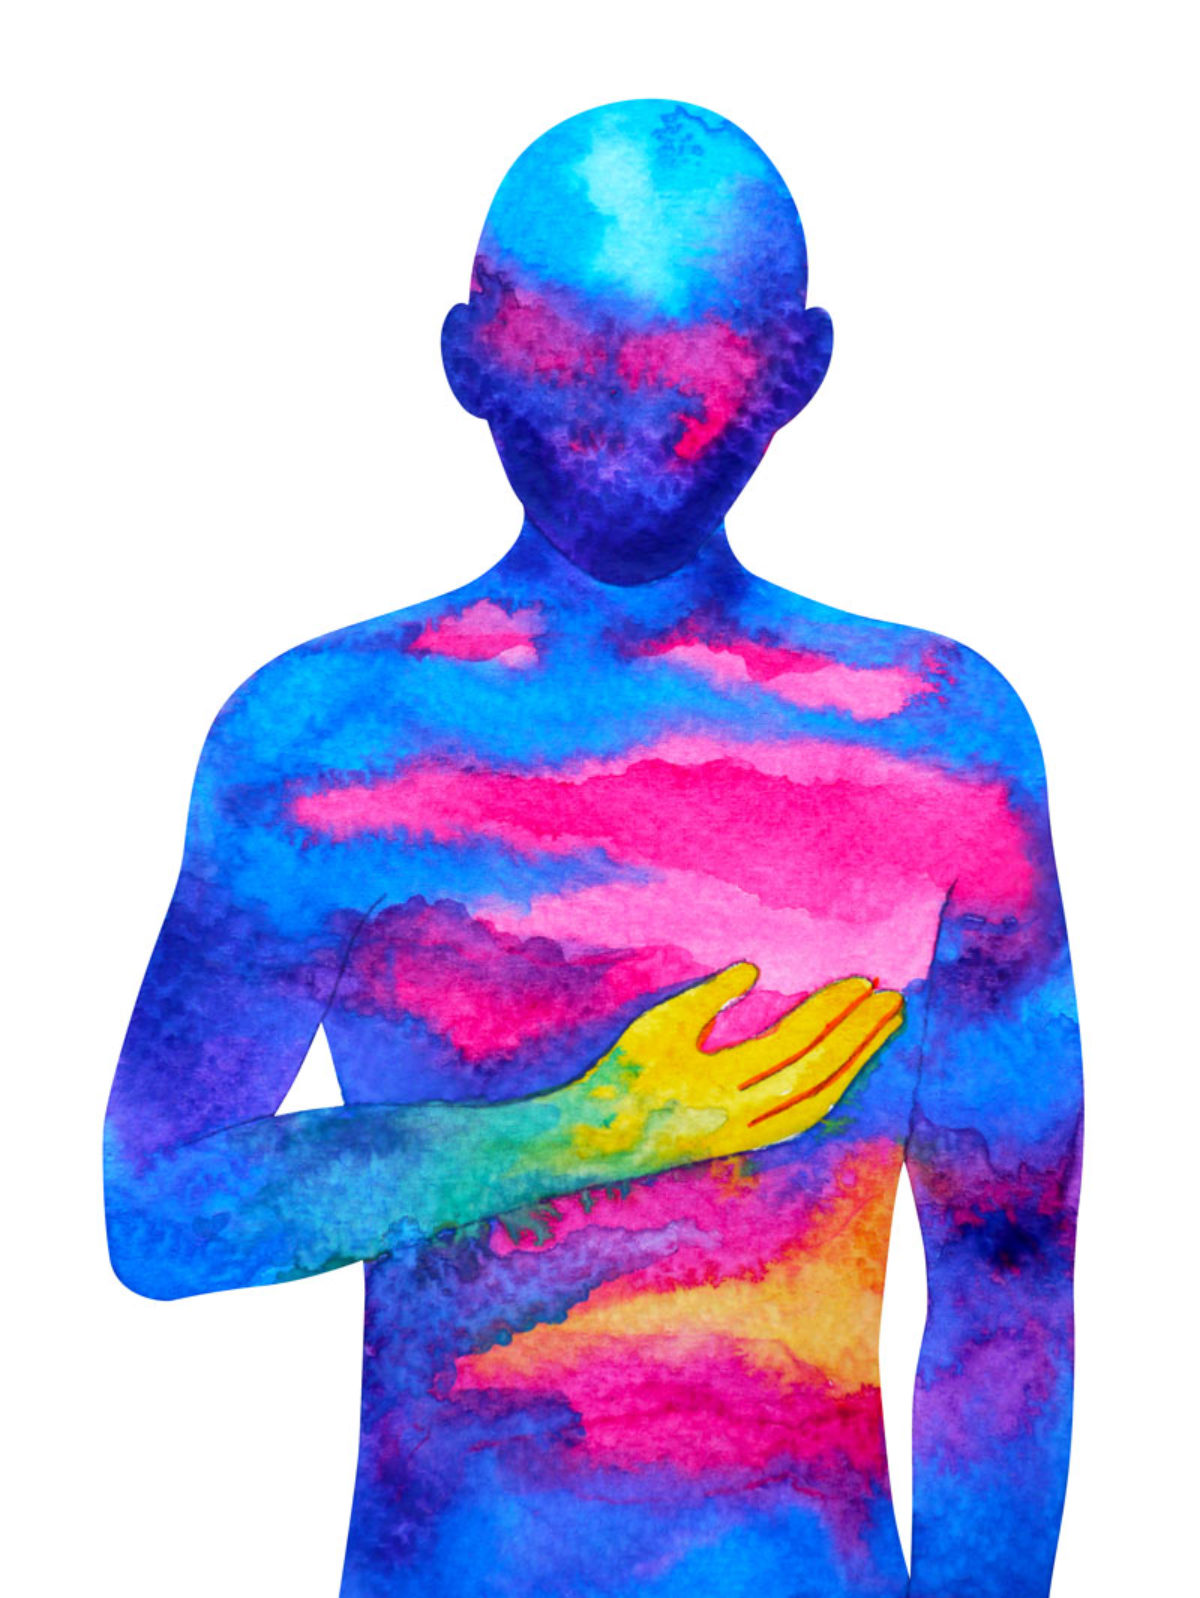 A Human Painted In Watercolor Holding A Hand Over Heart To Demonstrate The Link Between Stress In The Body And In The Mind